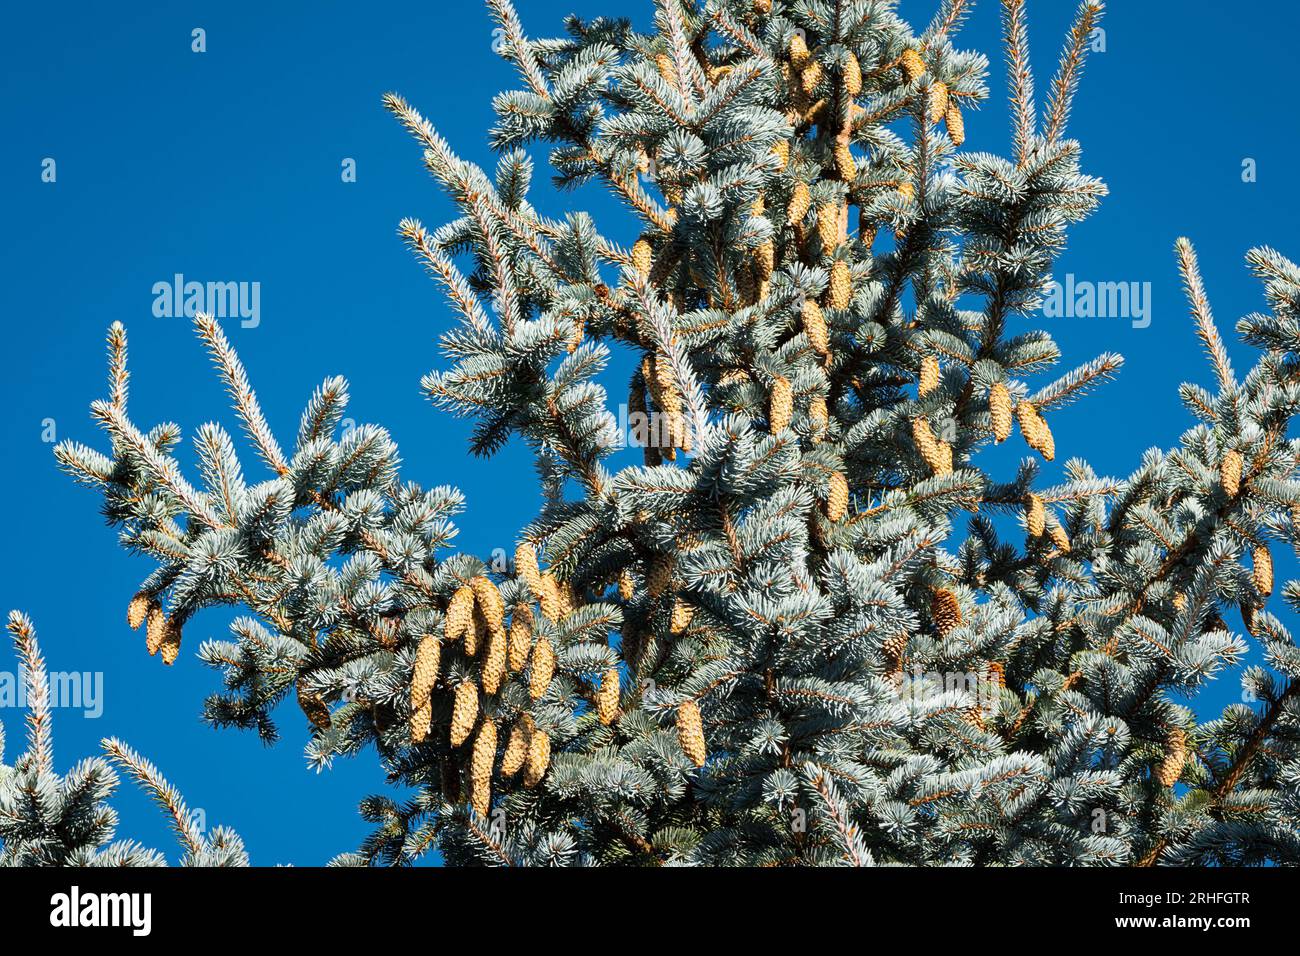 Young cones on a blue spruce (Picea pungens glauca) against a deep blue sky as background Stock Photo